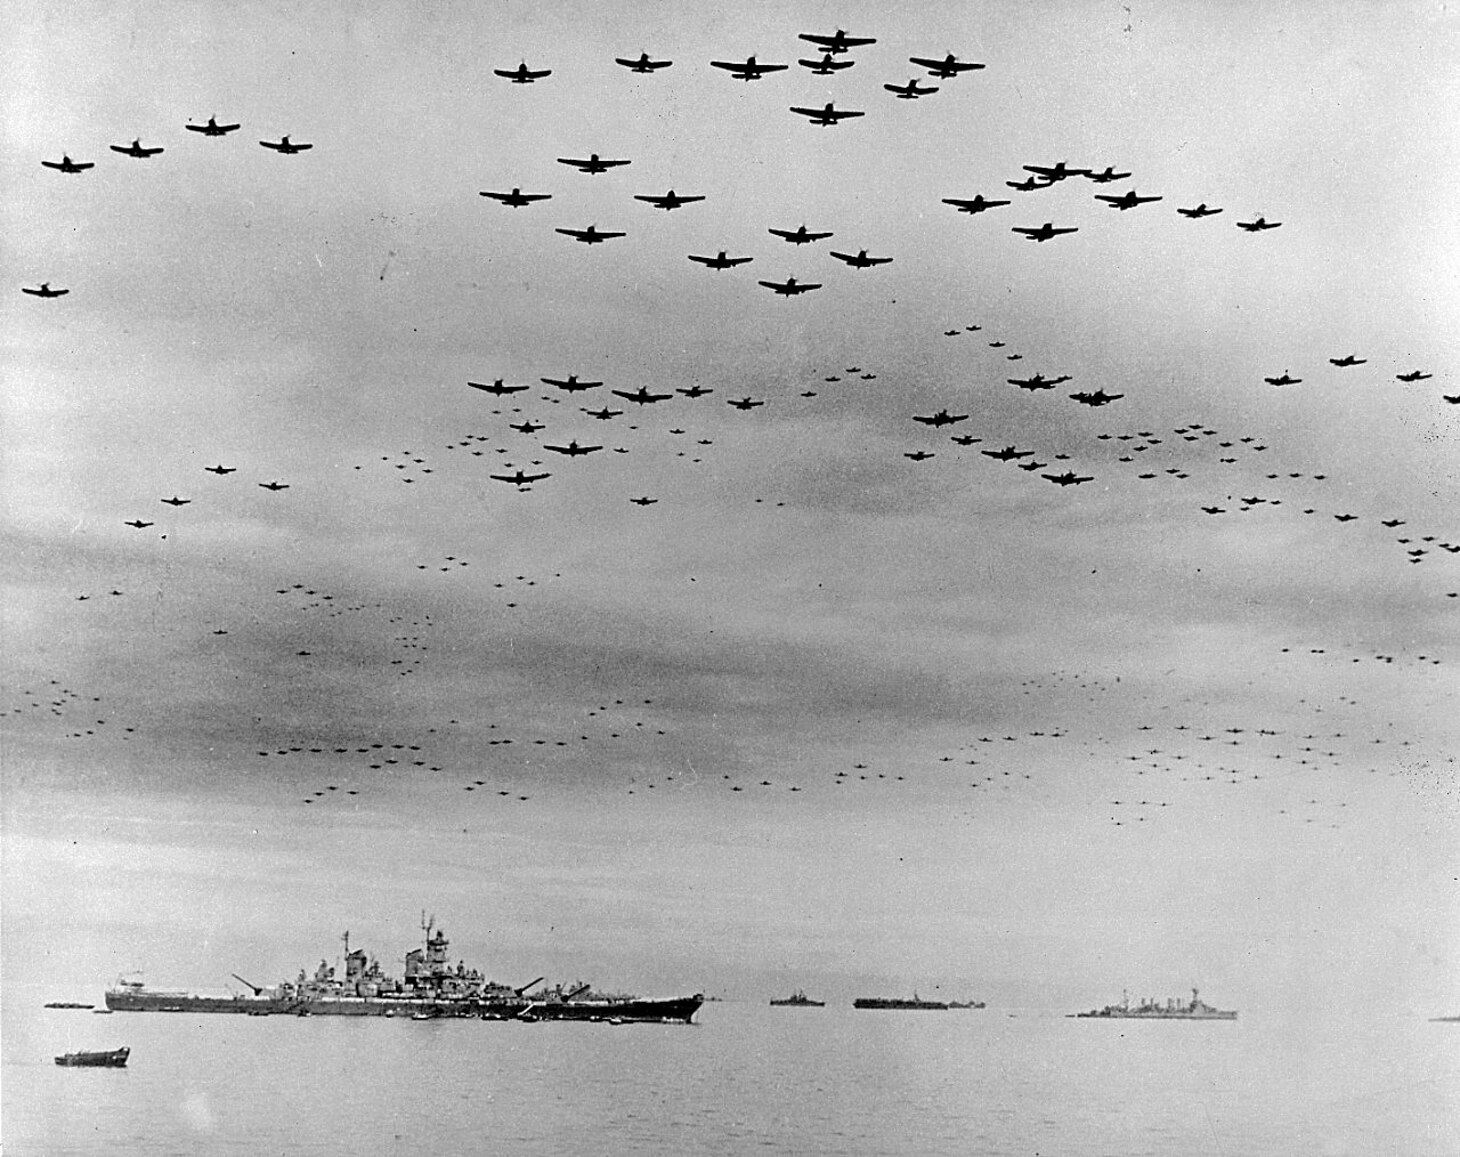 The massive 800-plus flyover (460 B-29s—after a 6 ½-hour flight from the Marianas—and 349 carrier aircraft flying at perhaps 1,500 feet to 3,000 feet, because of weather conditions, including some 2,200 engines) of the surrender-signing ceremony aboard the USS Missouri (BB-63) on September 2, 1945, and other assembled ships bears witness to how strong the Allies had become since Pearl Harbor (December 7, 1941)and frankly, how weak the Japanese had deteriorated to.